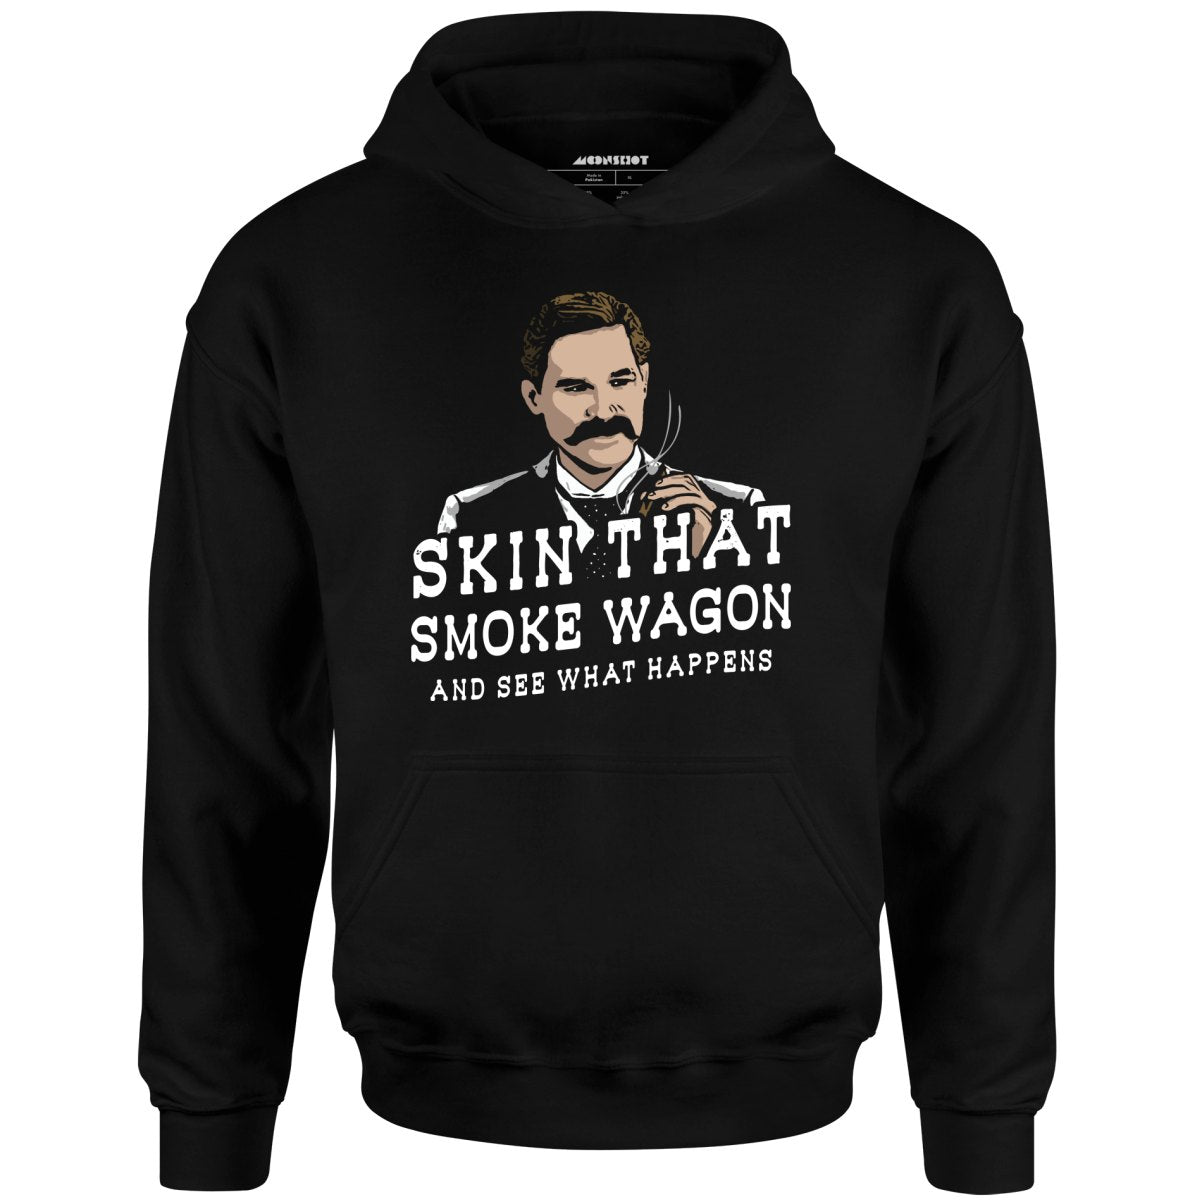 Skin That Smoke Wagon and See What Happens - Unisex Hoodie